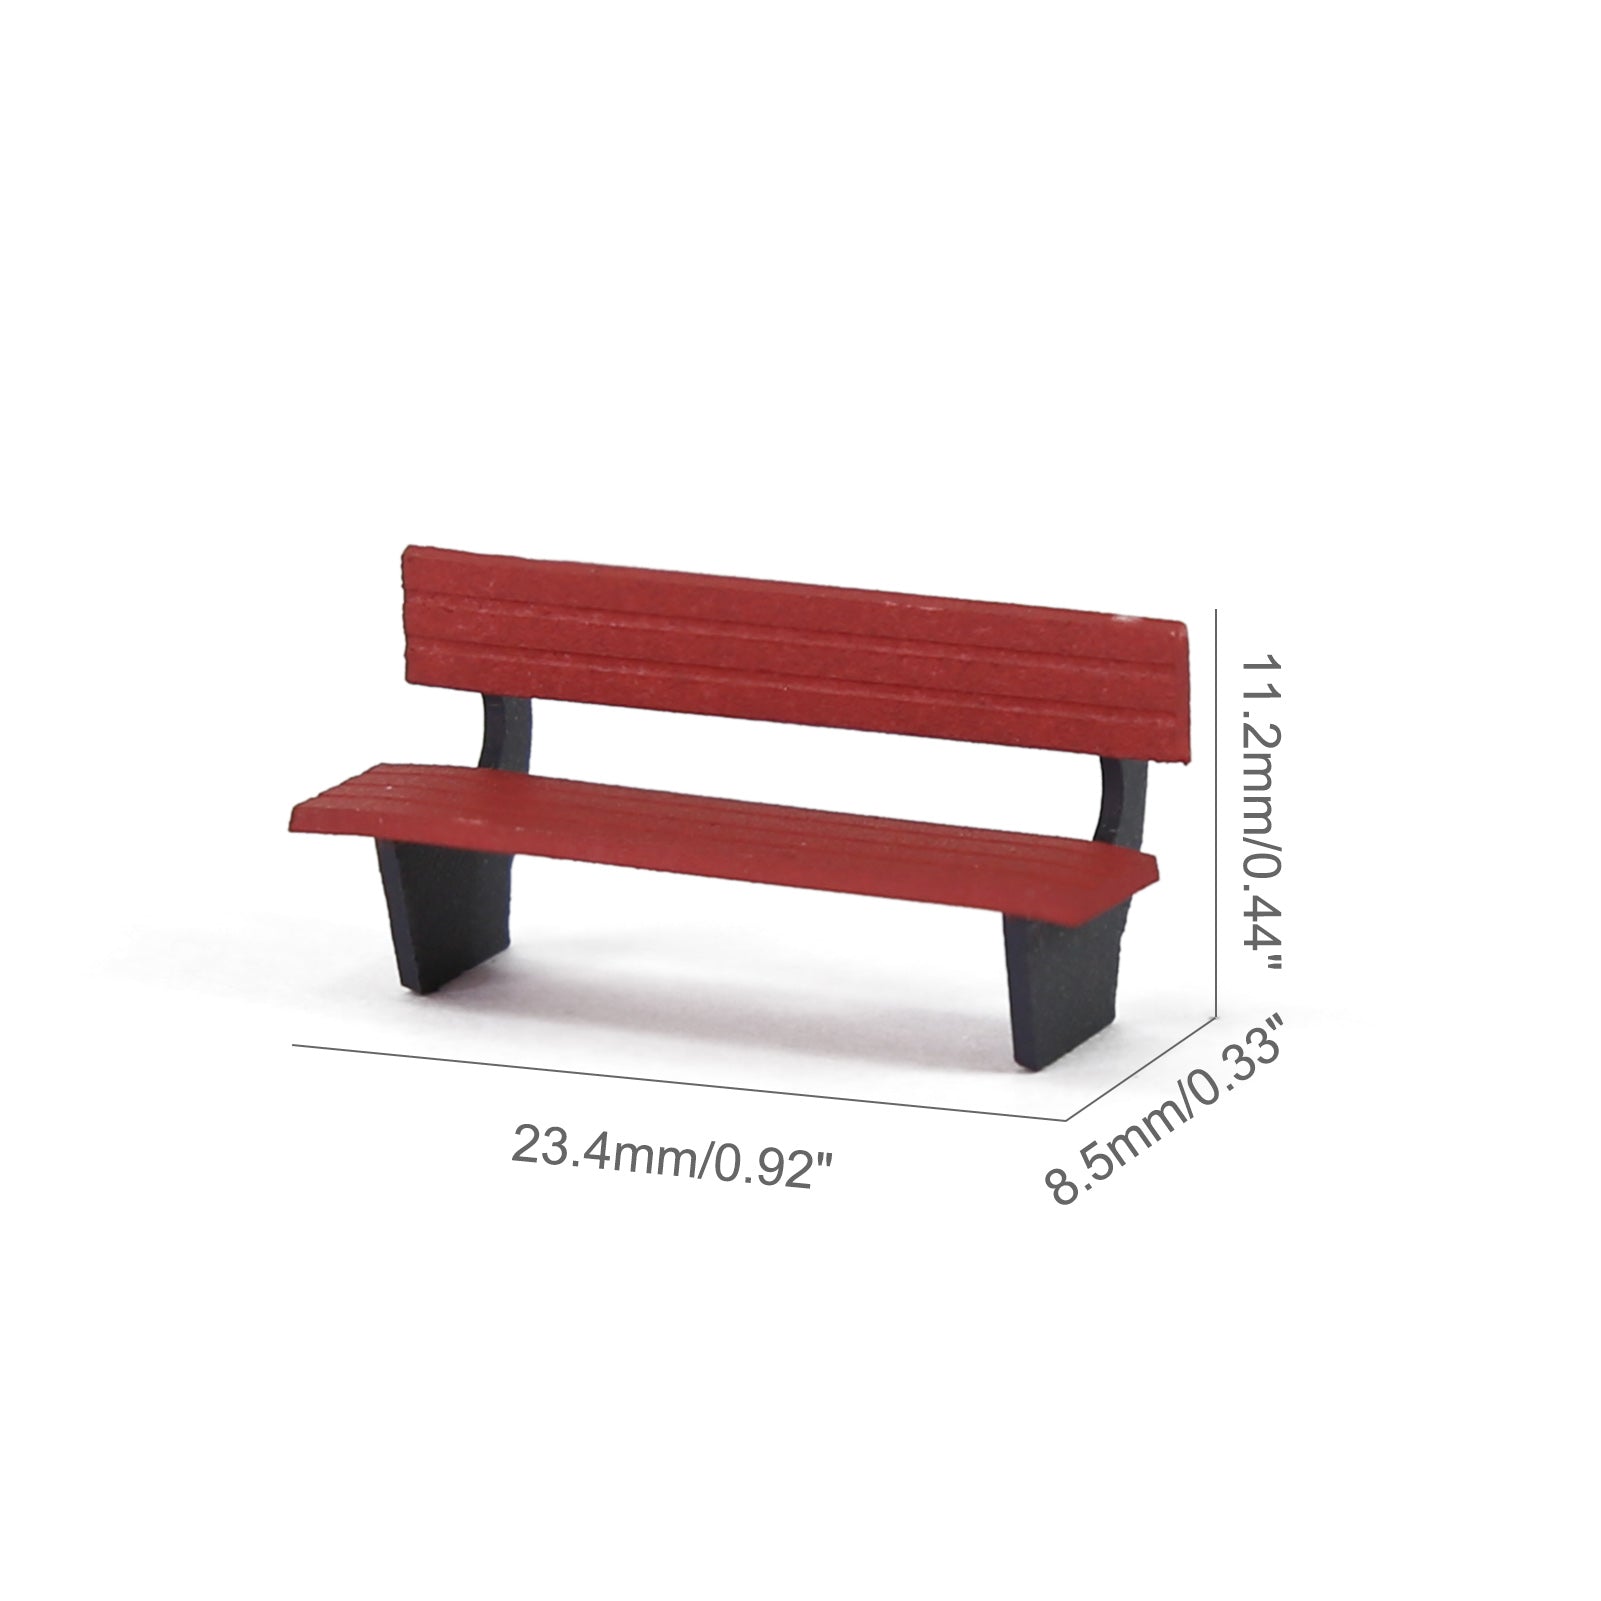 ZY39087 12pcs HO Scale 1:87 Garden Park Red Benches Street Seats Chairs